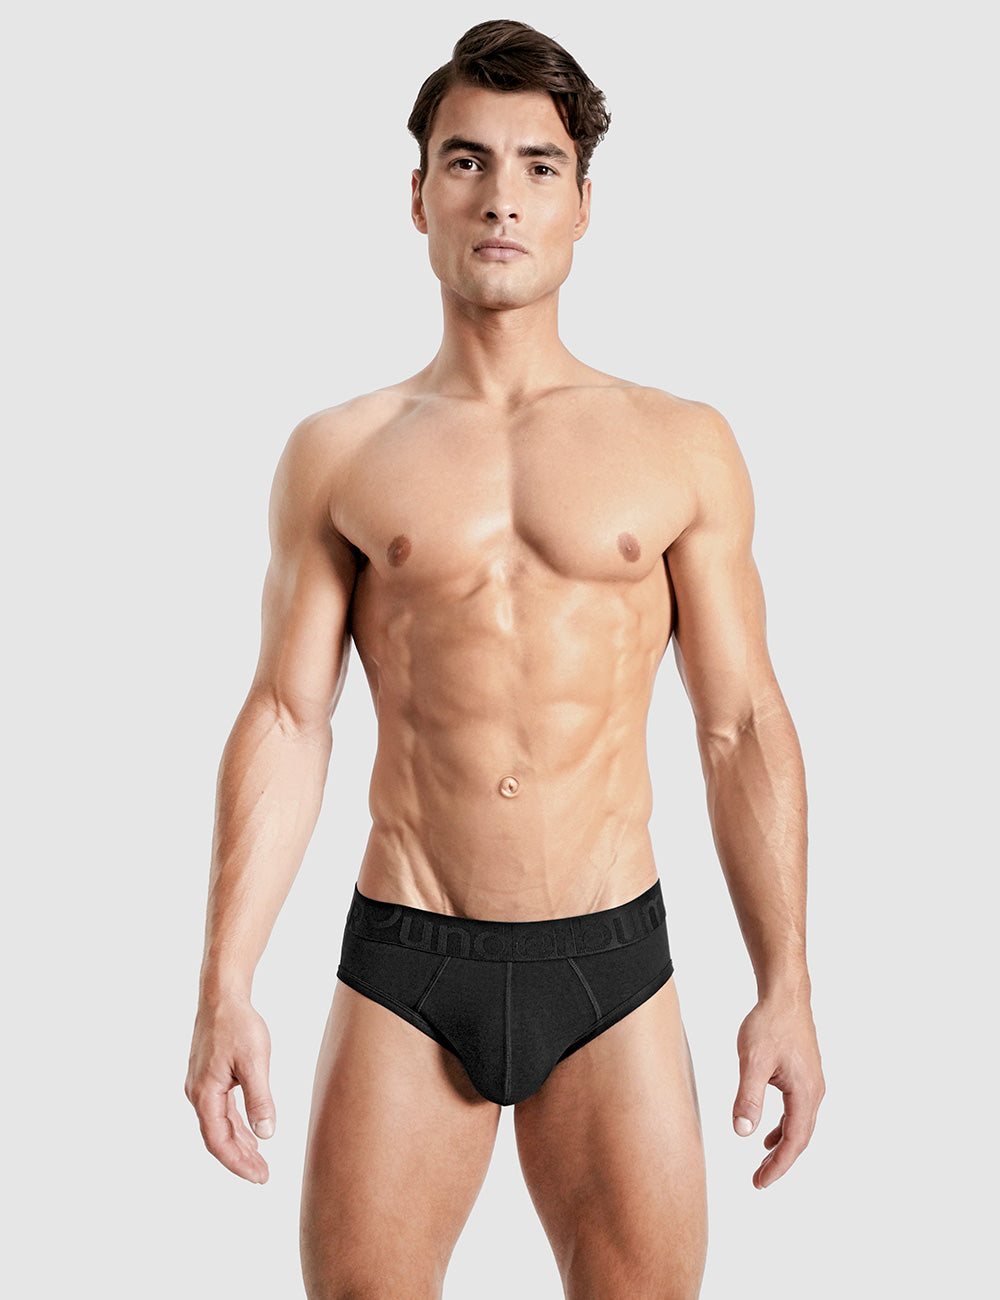 Men's Booty Lift Rounderbum Brief Padded Lifting Underwear Butt Booster  Push Up Trunks Shorts with Hip Removable Pad (Color : Black, Size : Small)  at  Men's Clothing store